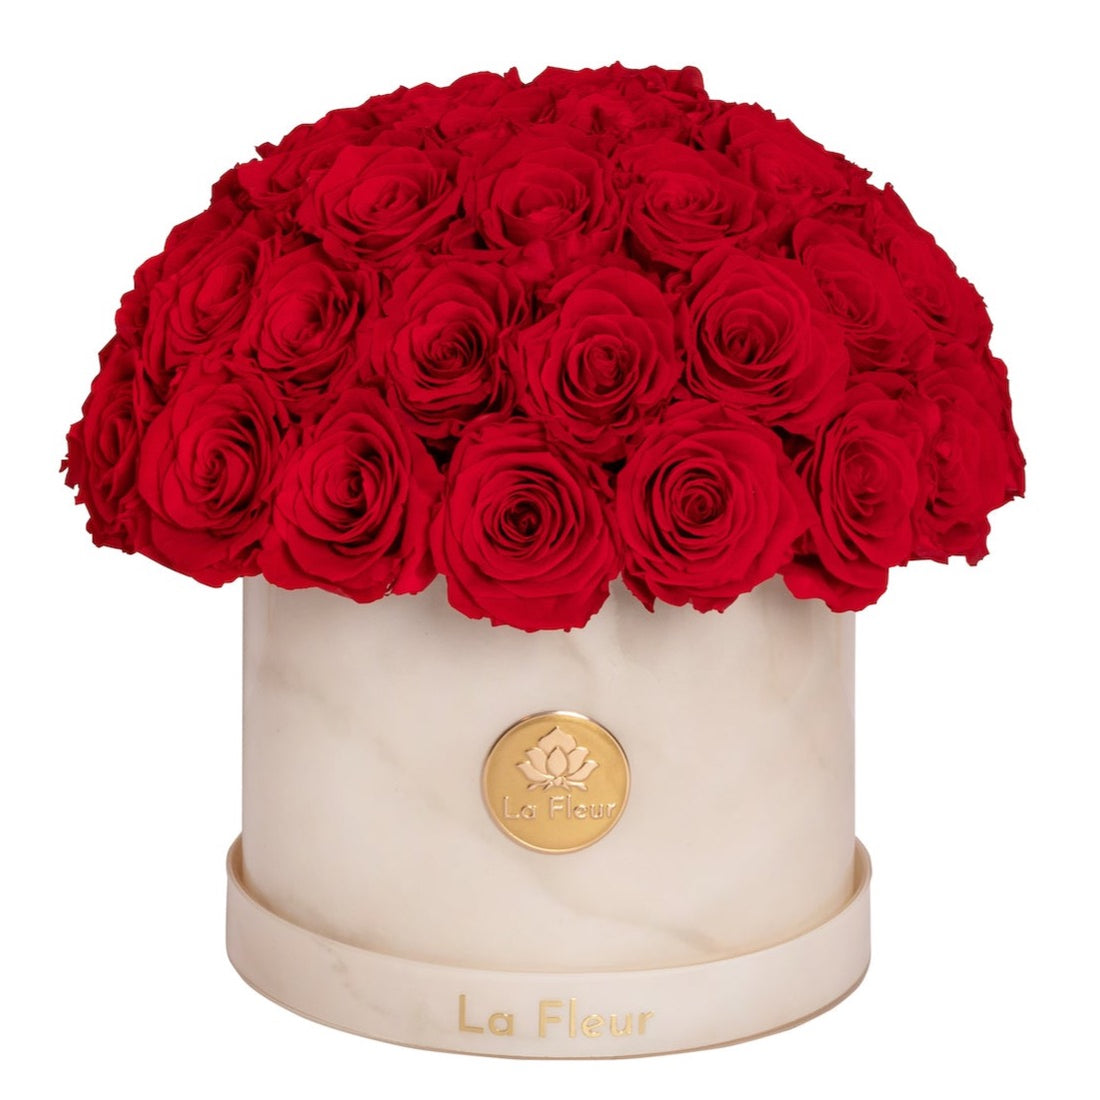 Red and white Roses Special Box in Tampa FL - Albelos Flowers